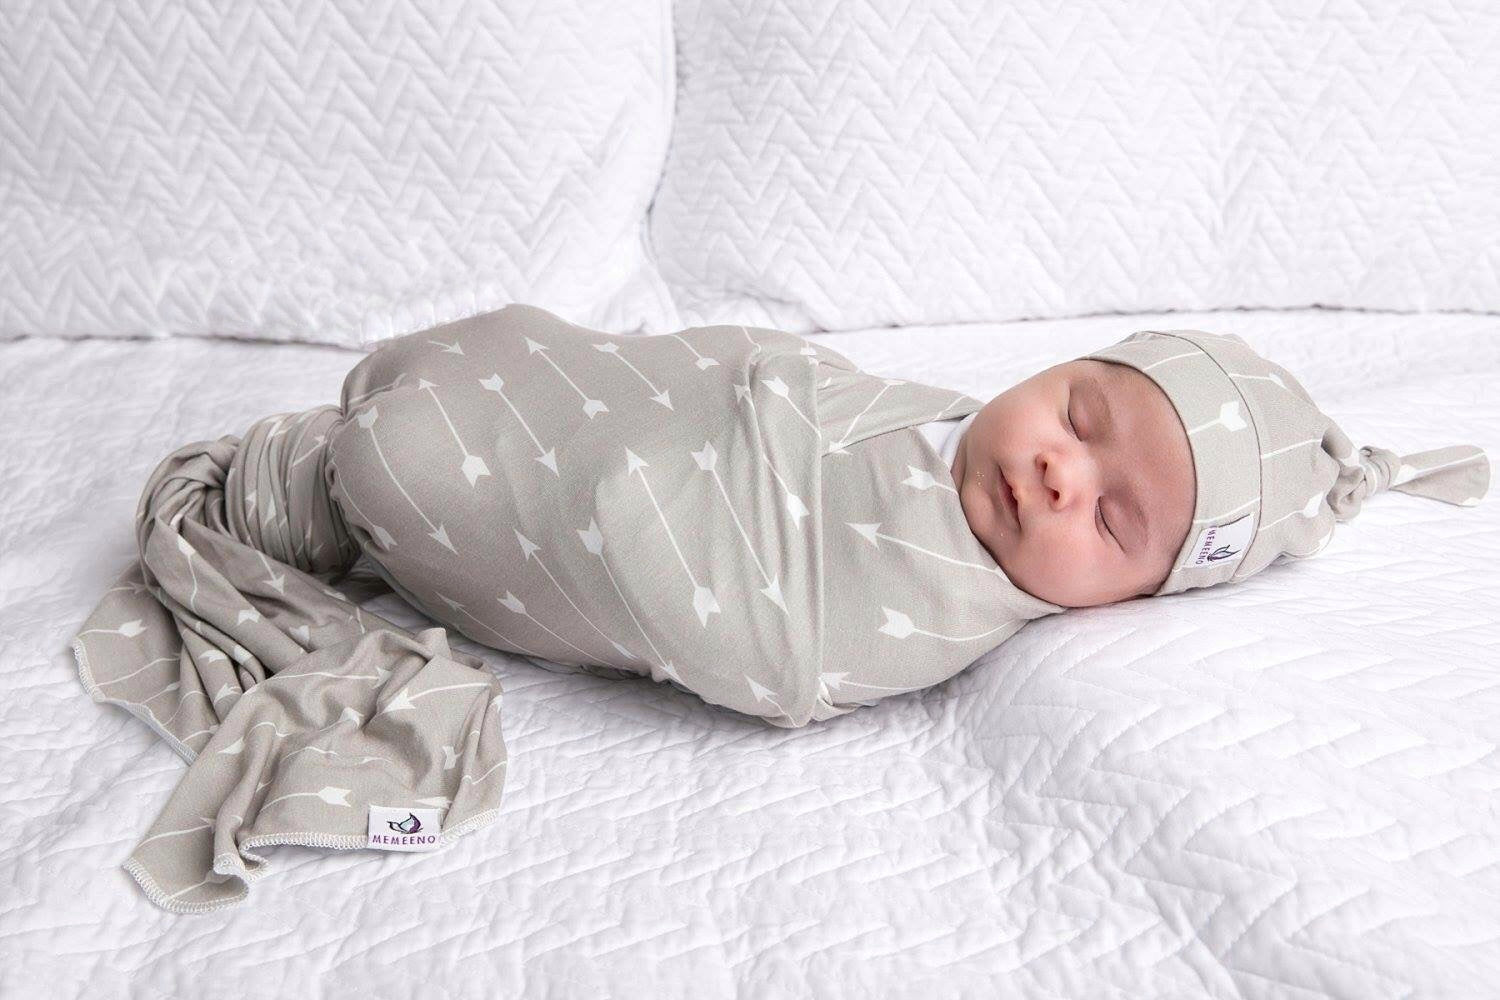 Don't Know How to Swaddle? Here's How!